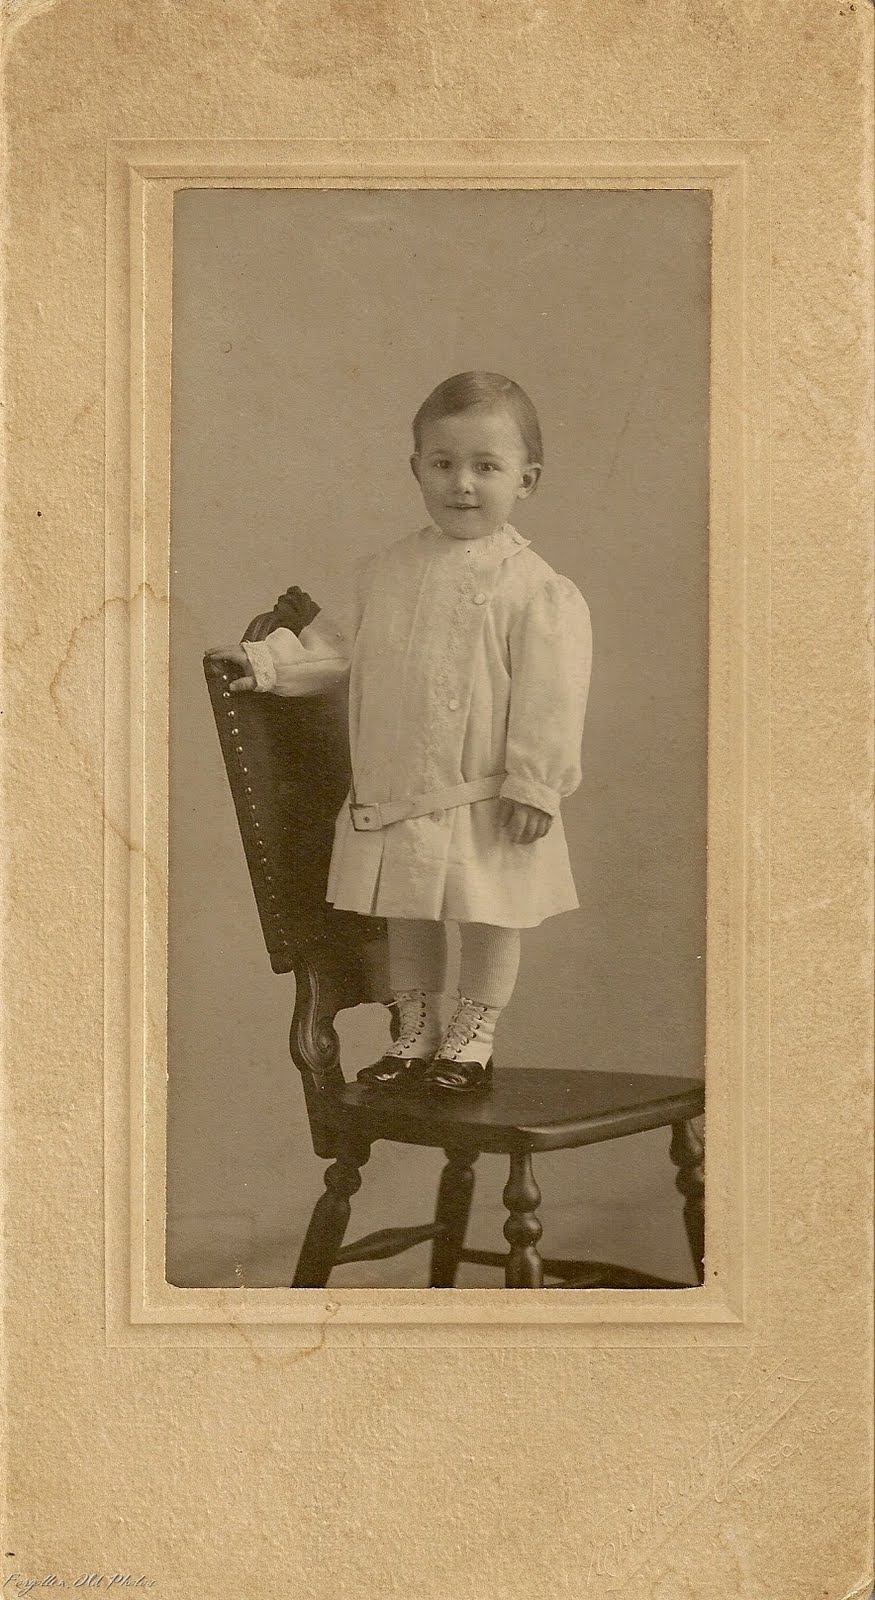 [Child%2520in%2520Chair%2520in%2520cute%2520shoes%2520DL%2520Antiques%255B8%255D.jpg]